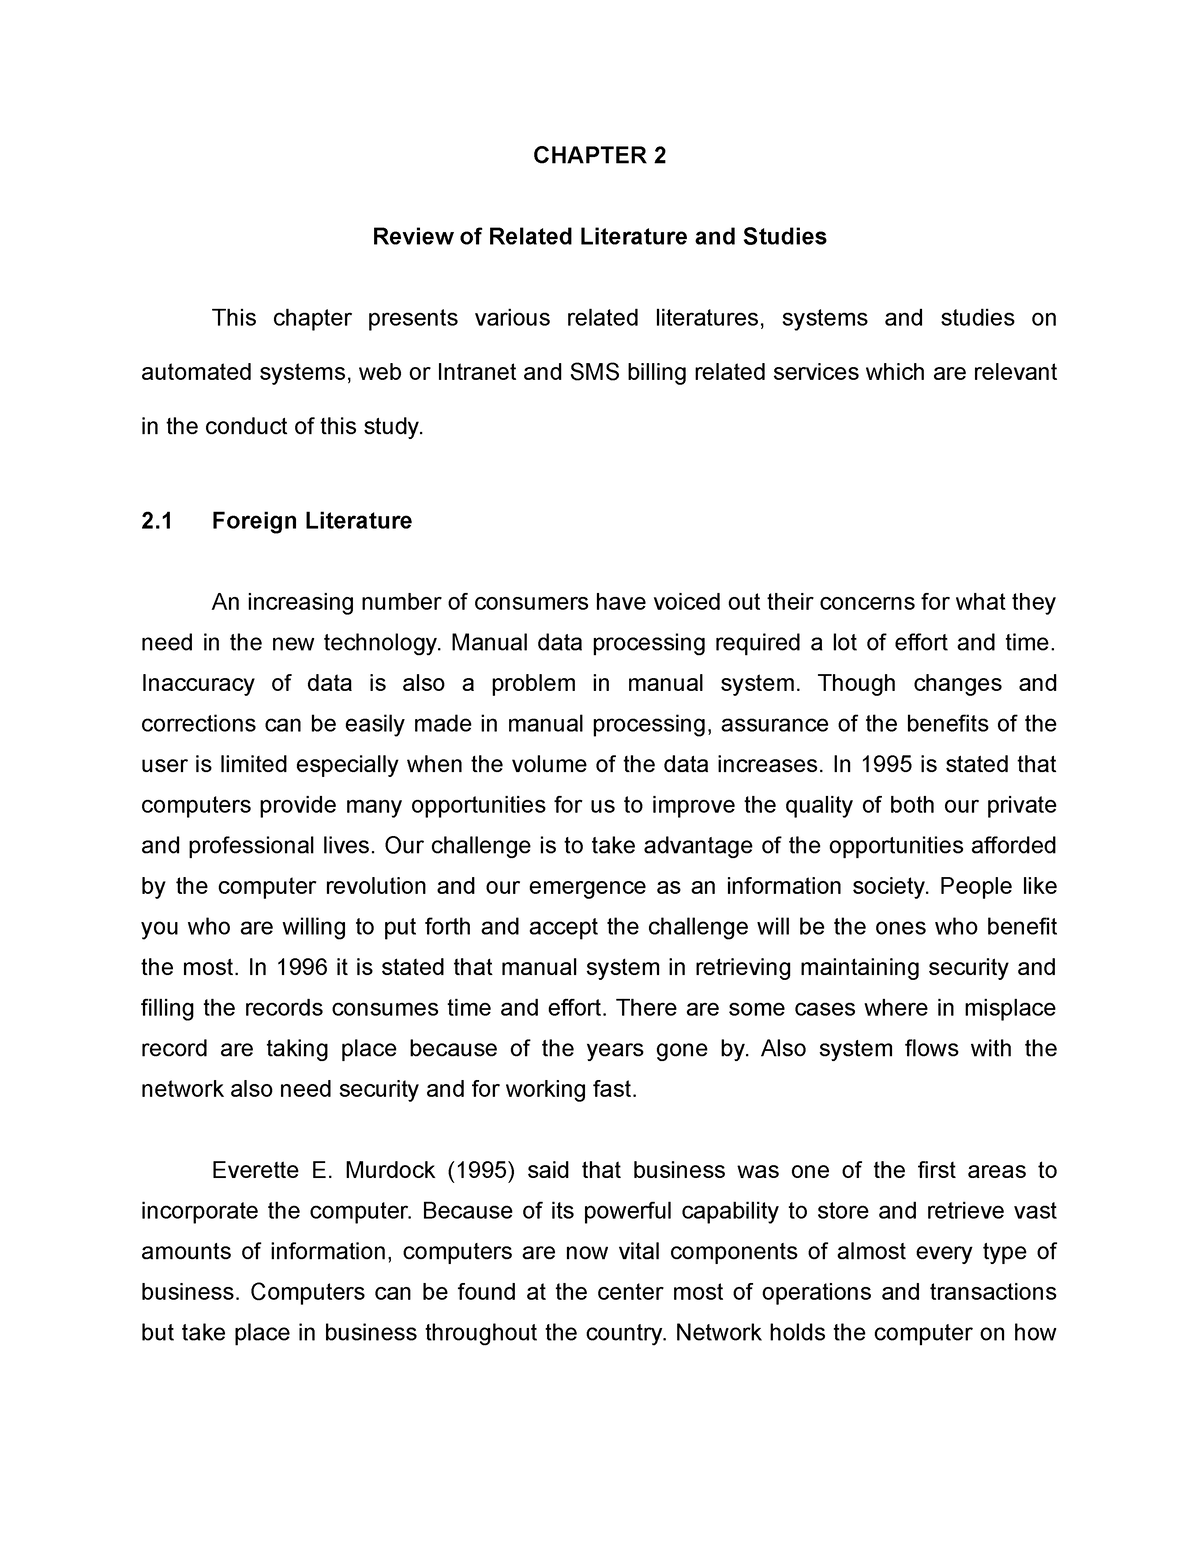 capstone project literature review sample